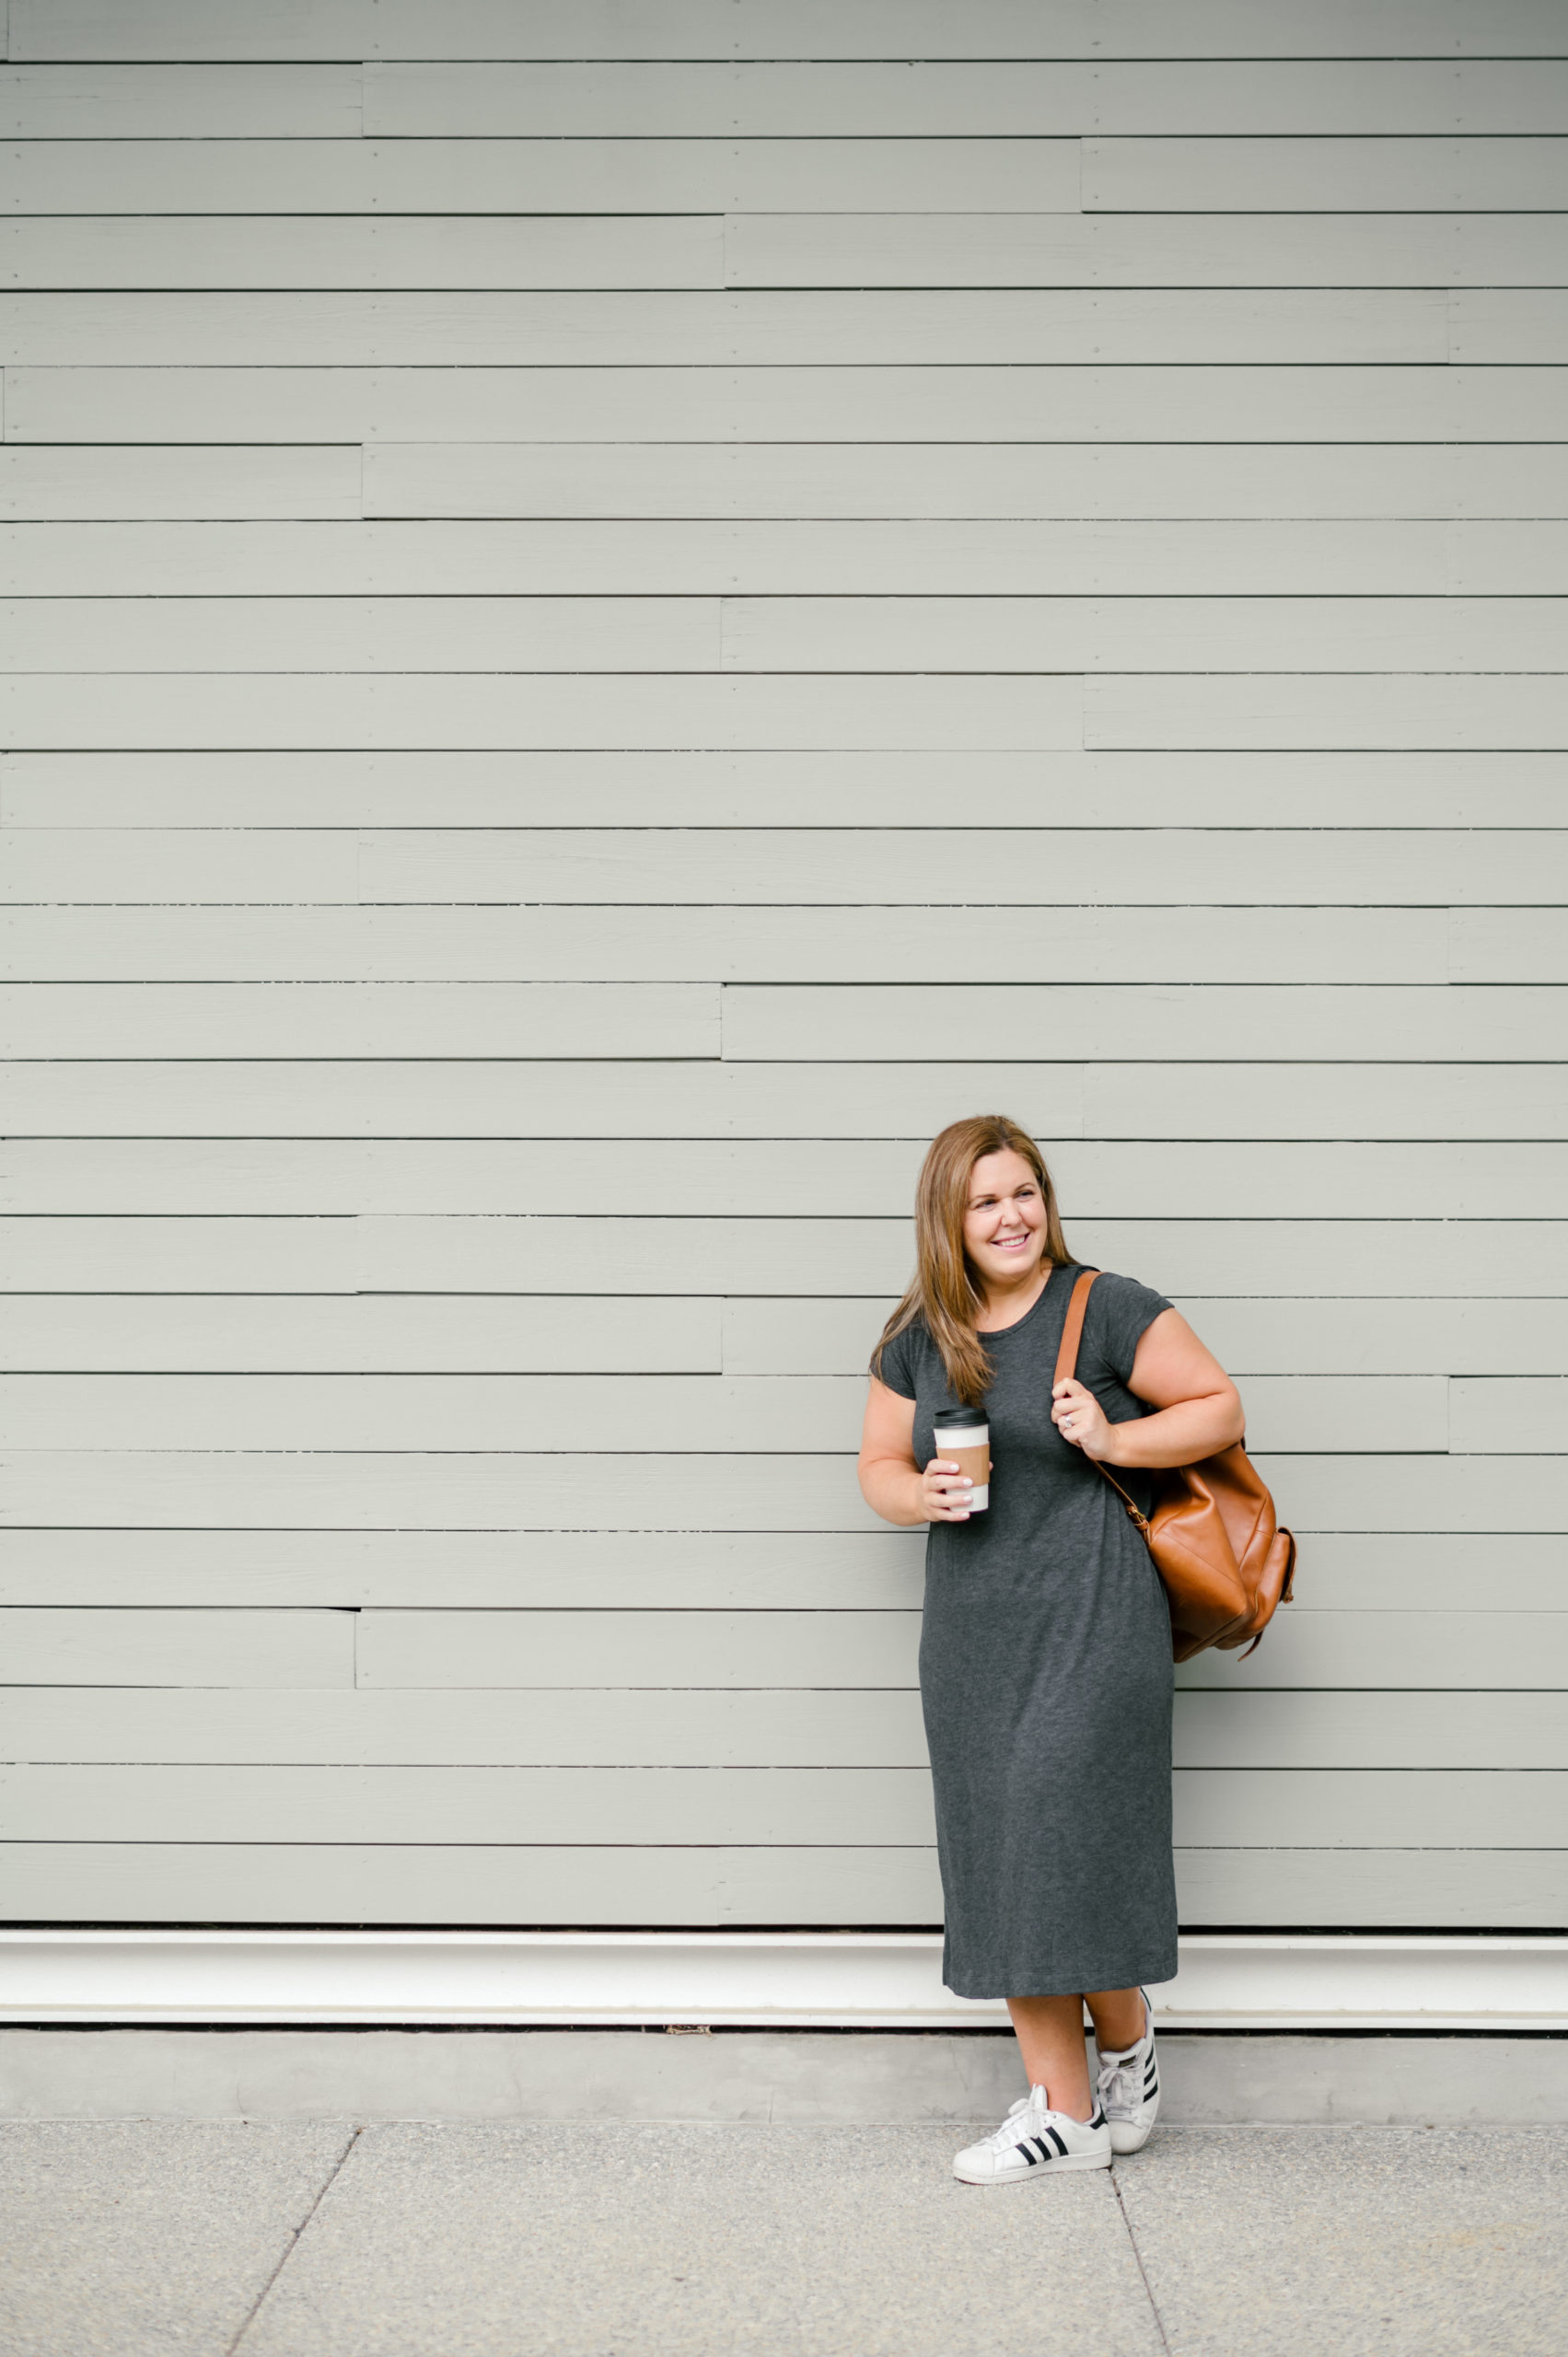 Woman standing holding a cup of coffee in a grey t-shirt dress holding a brown leather backpack her personal brand photos